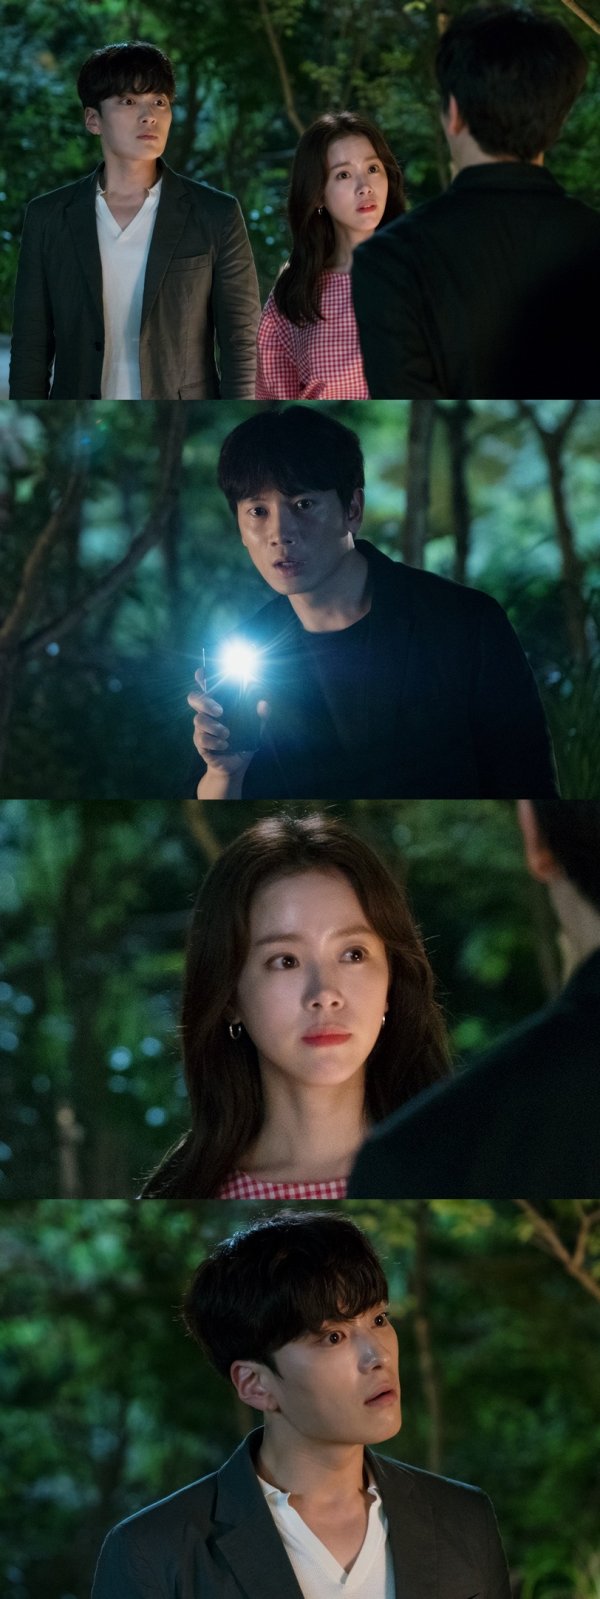 The world awkward summer night of Ji Sung, Han Ji-min and Jang Seung-jo was spotted in a three-way face-to-face.The TVN tree drama Knowing Wife (playplayplayed by Yang Hee-seung and directed by Lee Sang-yeop) raises questions by revealing the scene of Ji Sungs full-time pride in front of Woojin (Han Ji-min) and Jong Hu (Jang Seung-jo), who went on a night walk, on the 16th, ahead of the 6th broadcast.Joo Hyuk and Woojin, who live in a different present, caught up with voice phishing and showed a fantasy combination play.After learning all about Woojin and his mother (Lee Jung Eun), who had dementia, Juhyuk stopped the obstruction and began to recognize as a colleague.In the meantime, the best friend, who was in the charm of the lovely and wrong Woojin, started sending a straight heart signal.When Woojin bought Kimbap at the point where Night Shift was visited and Juhyuk came to the place, the end was already there.The end of the year predicted a new phase with straight-line Confessions, Do you want to meet me?The photos, which are released in the meantime, stimulate curiosity with the complex and subtle relationship of the three people: Woojin, captured after the Confessions, and the summer night walk after the end, stimulate curiosity.The lovely Woojin and the warm atmosphere of the friendly end are about to ripen, and the sudden appearance of Juhyuk changes the atmosphere at once.Woojin, who was surprised and surprised, and Joo Hyuk, who became an uninvited guest between the end of the pupil earthquake, pretended to be nervous, but pretended to be calm.I wonder what the awkward world of the world, Woojin, and the three-way face-to-face of the end will produce.The relationship between Joo Hyuk and Woojin will change again due to the end of the 6th broadcast on the 16th after the stone fastball Confessions.Attention is focusing on what kind of action the complicated Joo Hyuk will take in the unfamiliar but familiar Woojin, who recalls memories, and the closer the motive and close relationship of his new friend.The relationship between the characters who have been reversed due to the different present gives a fresh fun, the production team said. Watch how the relationship between the awkward Joo Hyuk, Woojin, and the end of the world will develop.